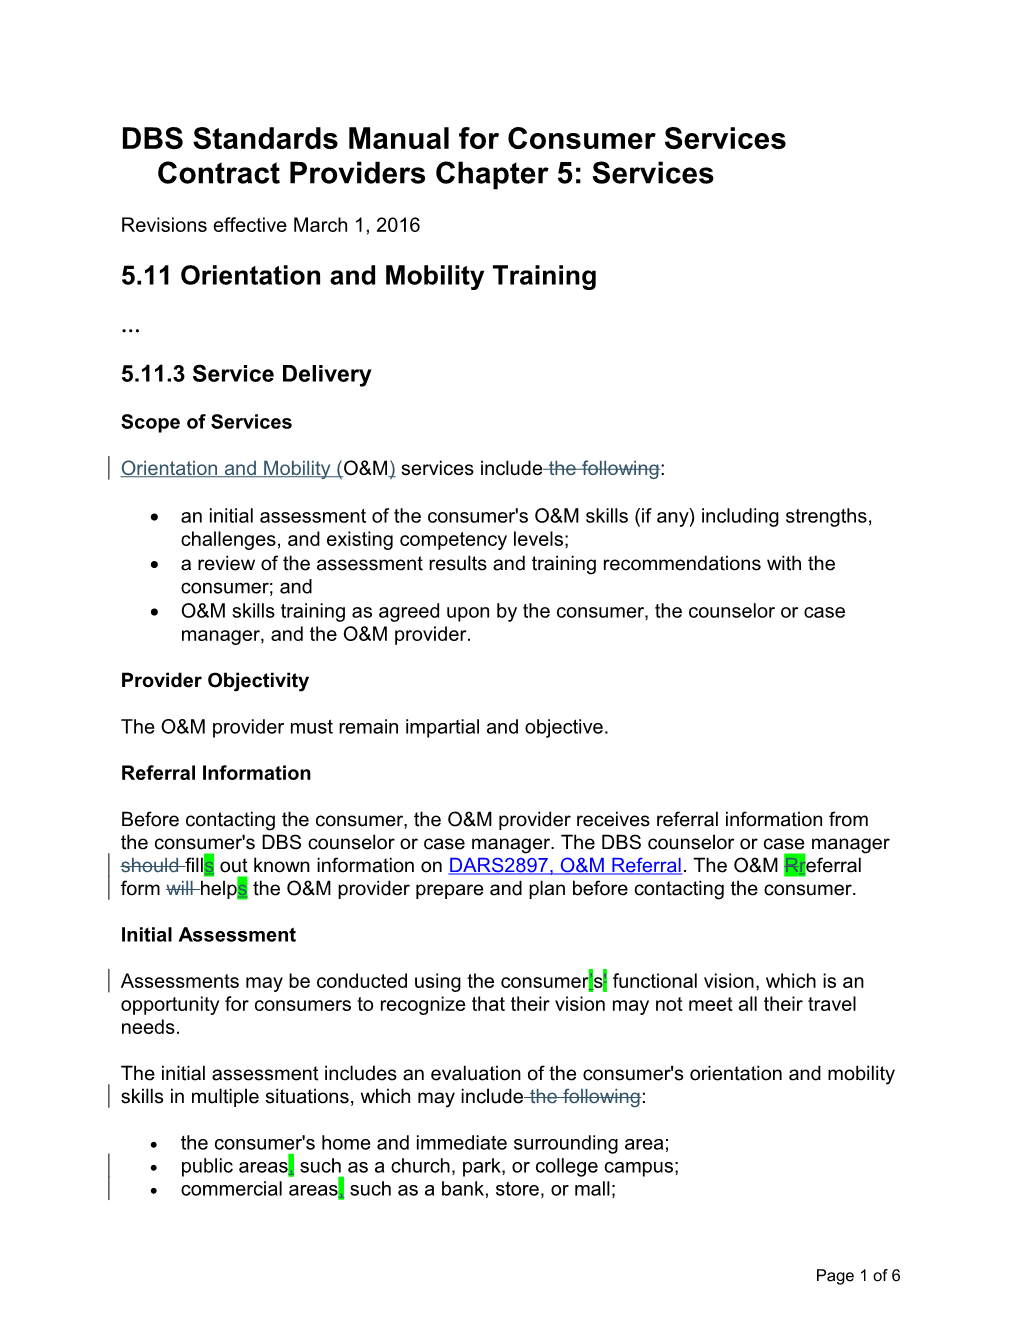 DBS Standards Manual for Consumer Services Contract Providers Chapter 5 Revisions, March 2016